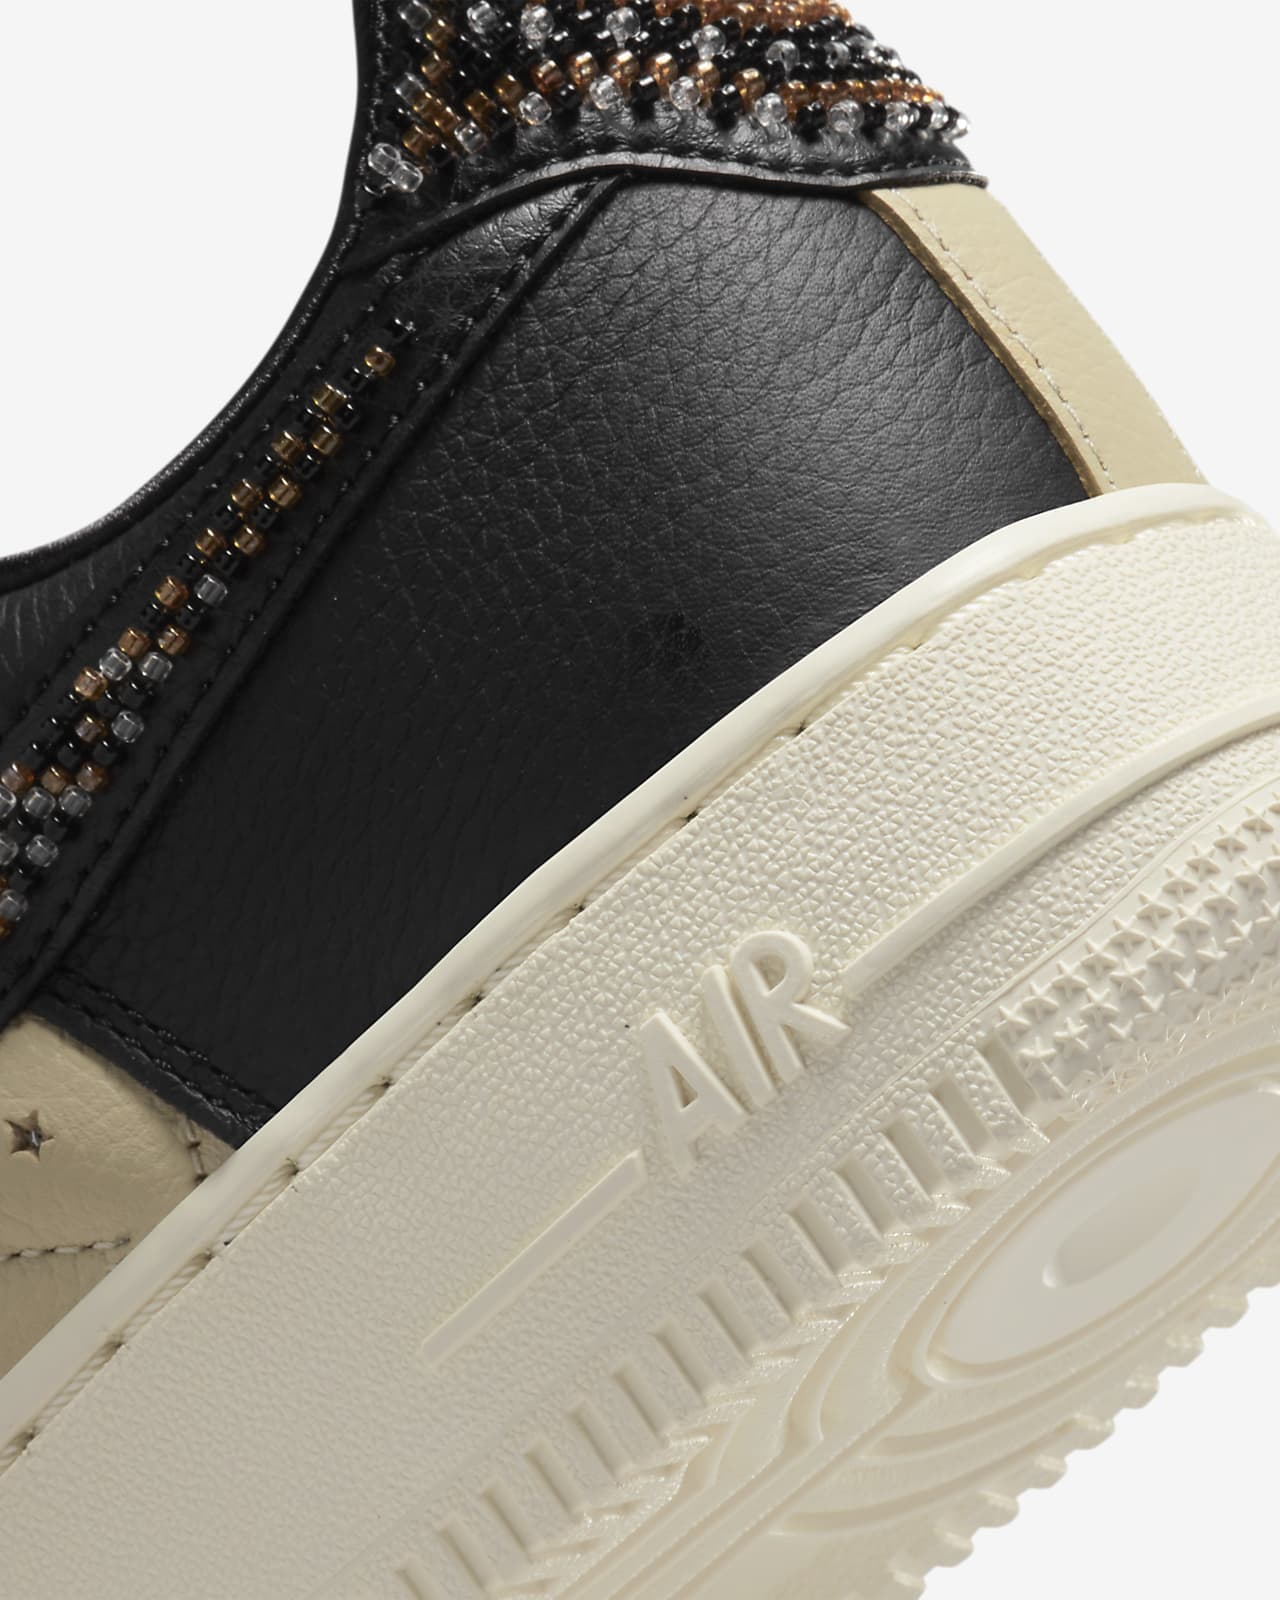 Nike Air Force 1 Low Goes Luxurious in Black and White